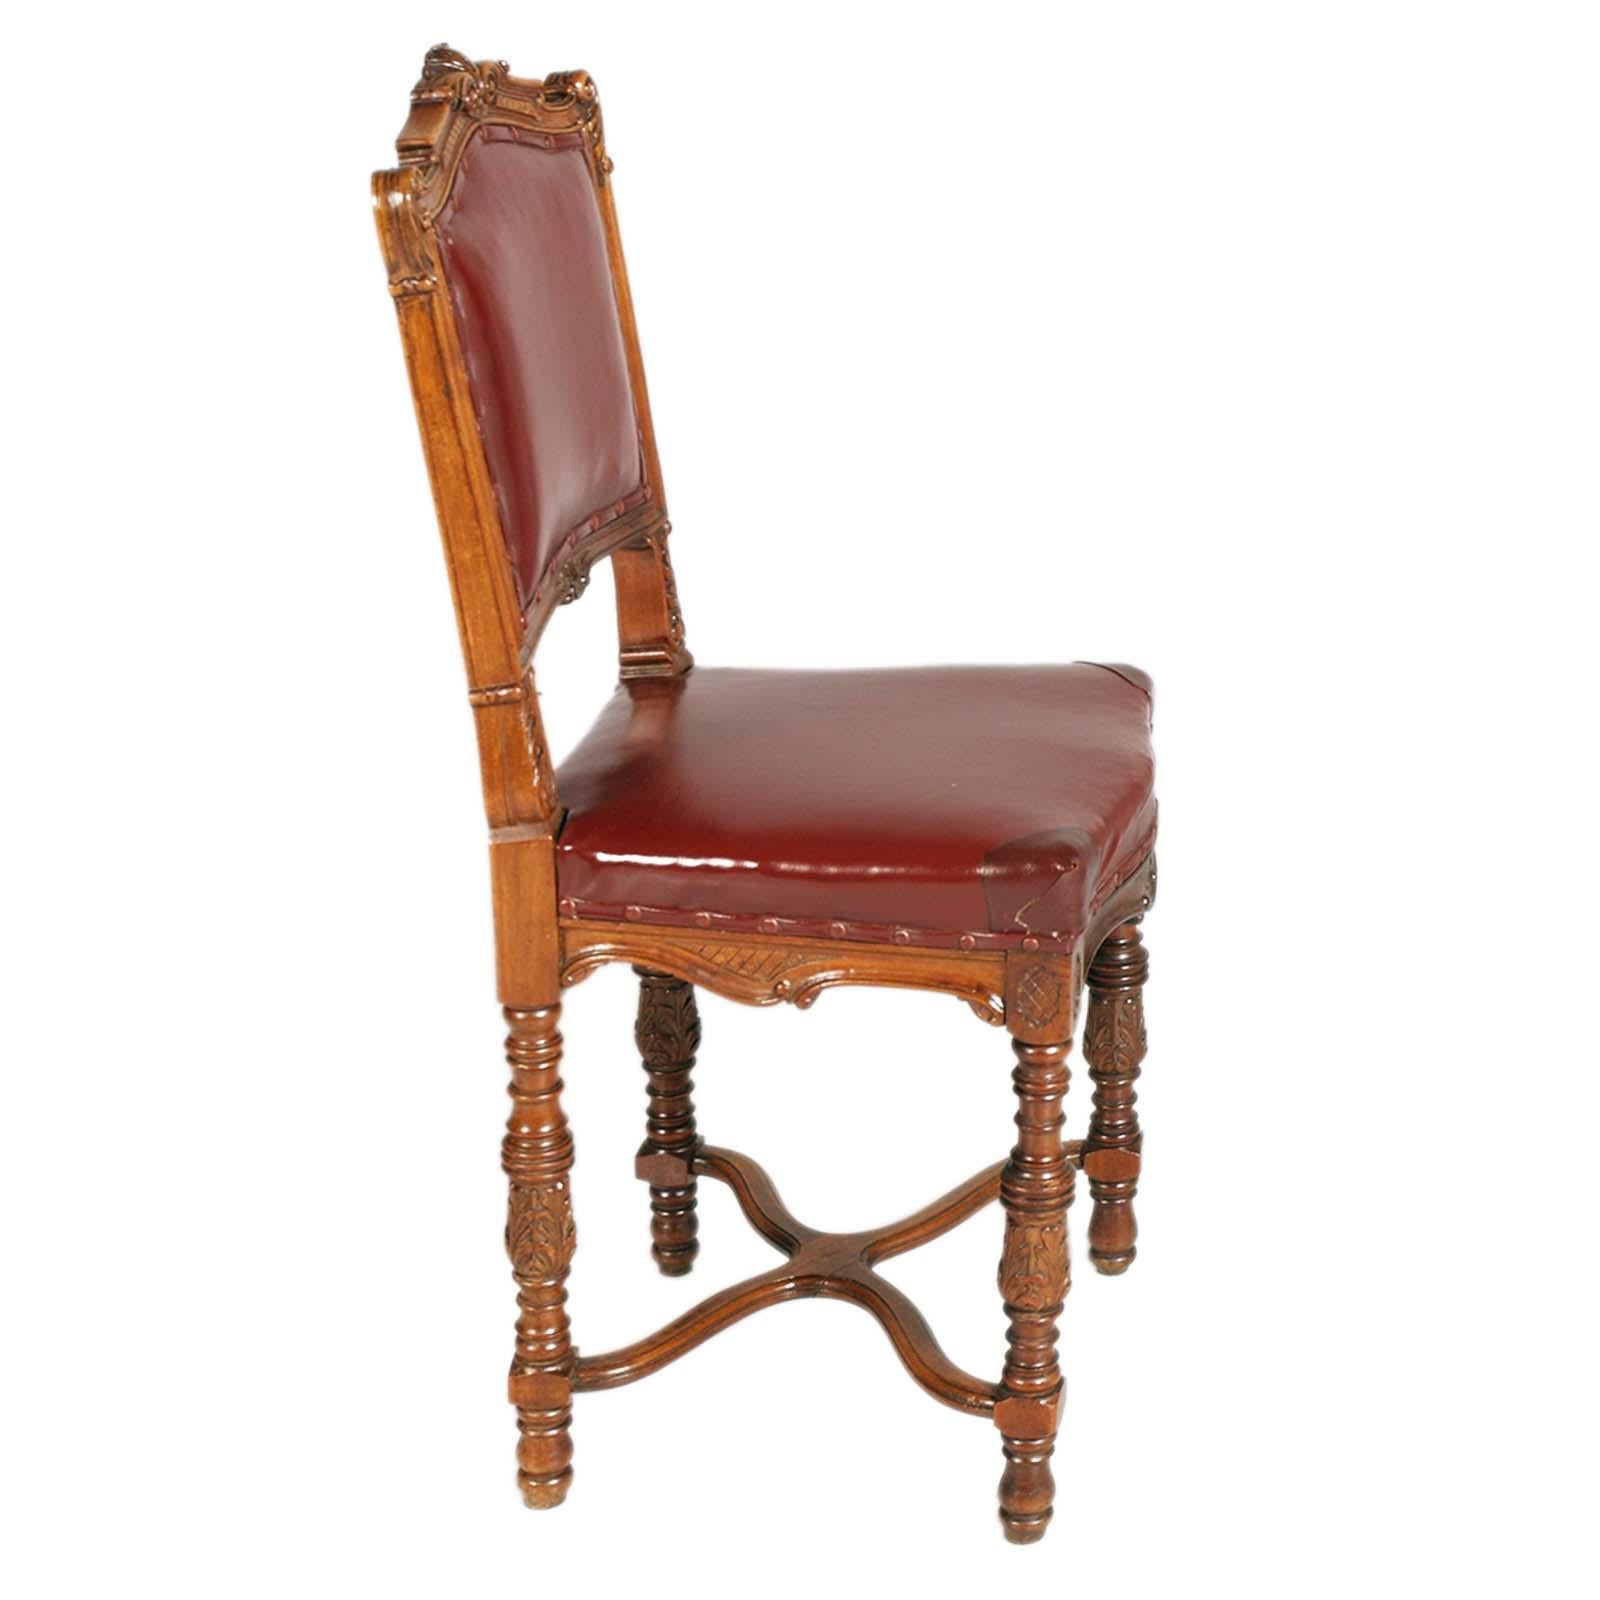 1880s Italian Chairs Neoclassic Eclectic Hand Carved Walnut Leather Upholstered For Sale 1